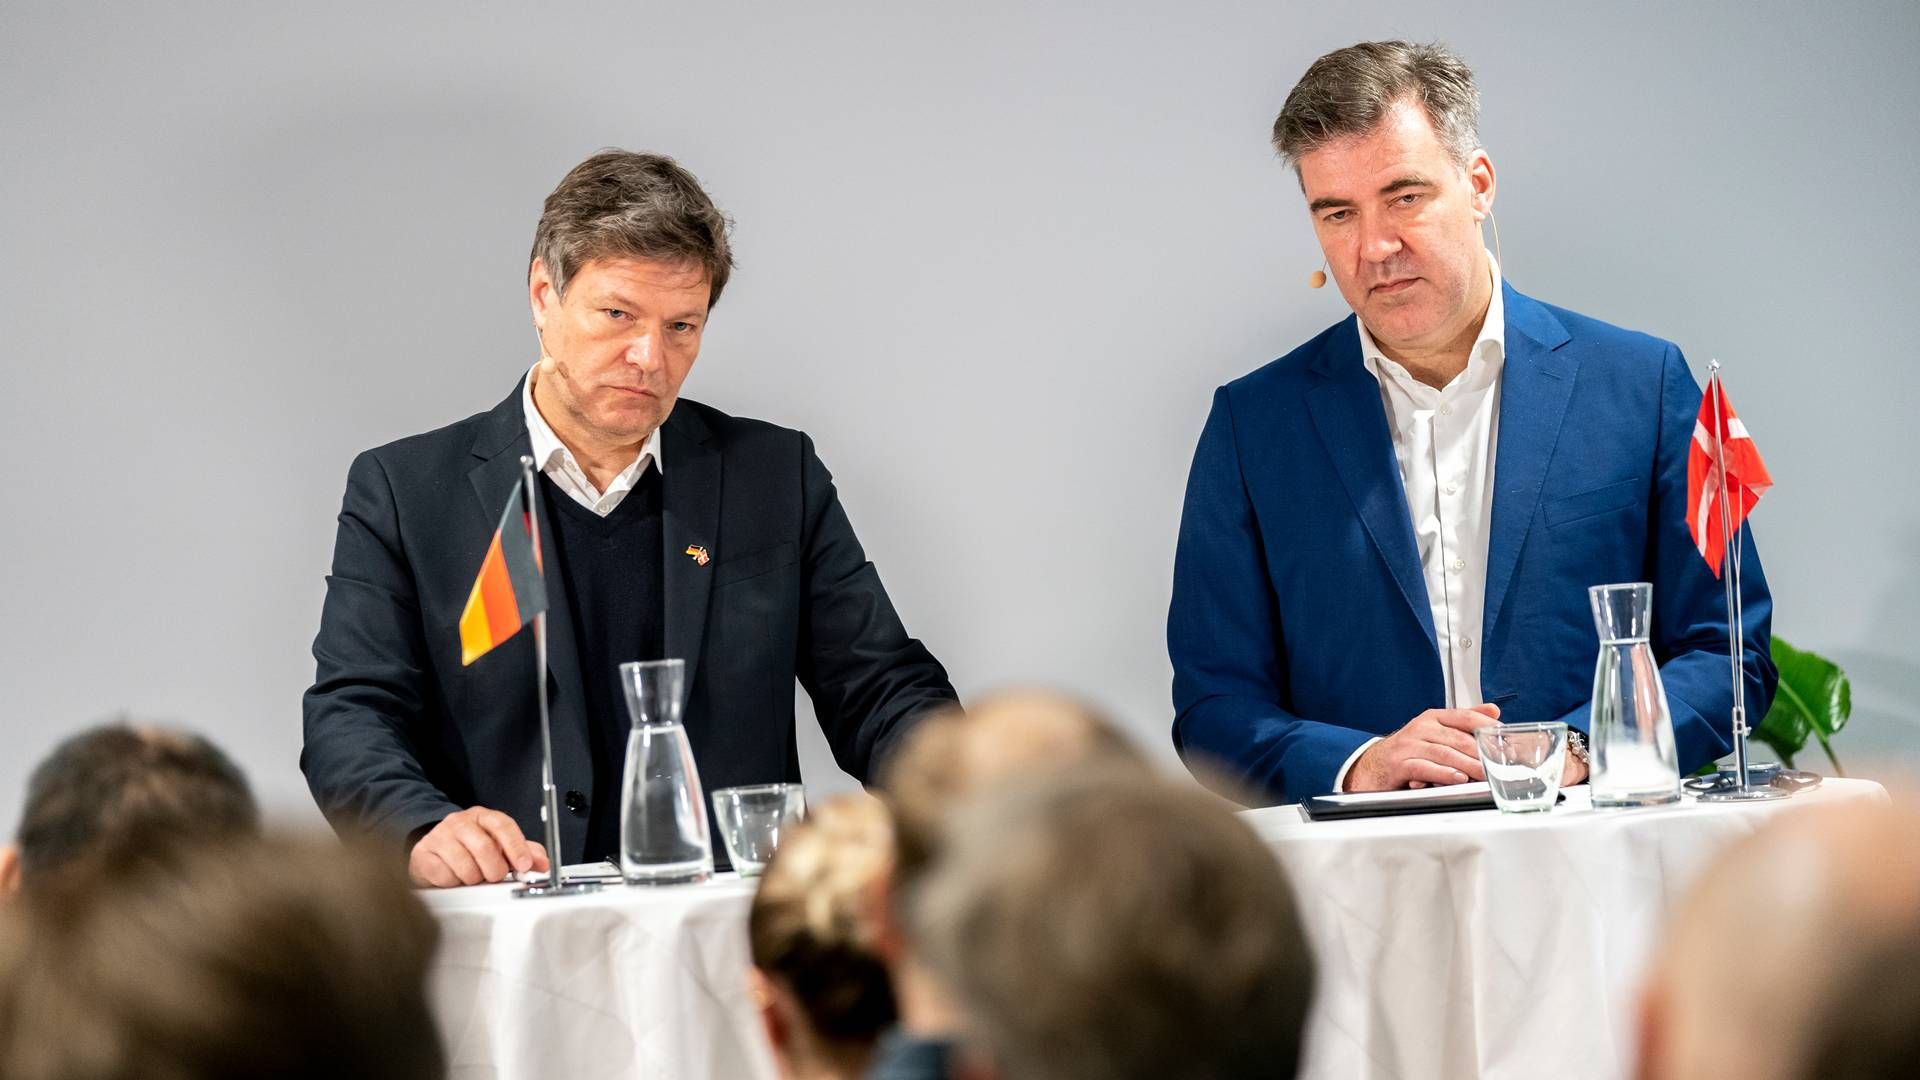 Danish energy minister Lars Aagaard and his German colleague Robert Habeck both see eye to eye on labelling nuclear power as a renewable or not. | Photo: Ida Marie Odgaard/Ritzau Scanpix